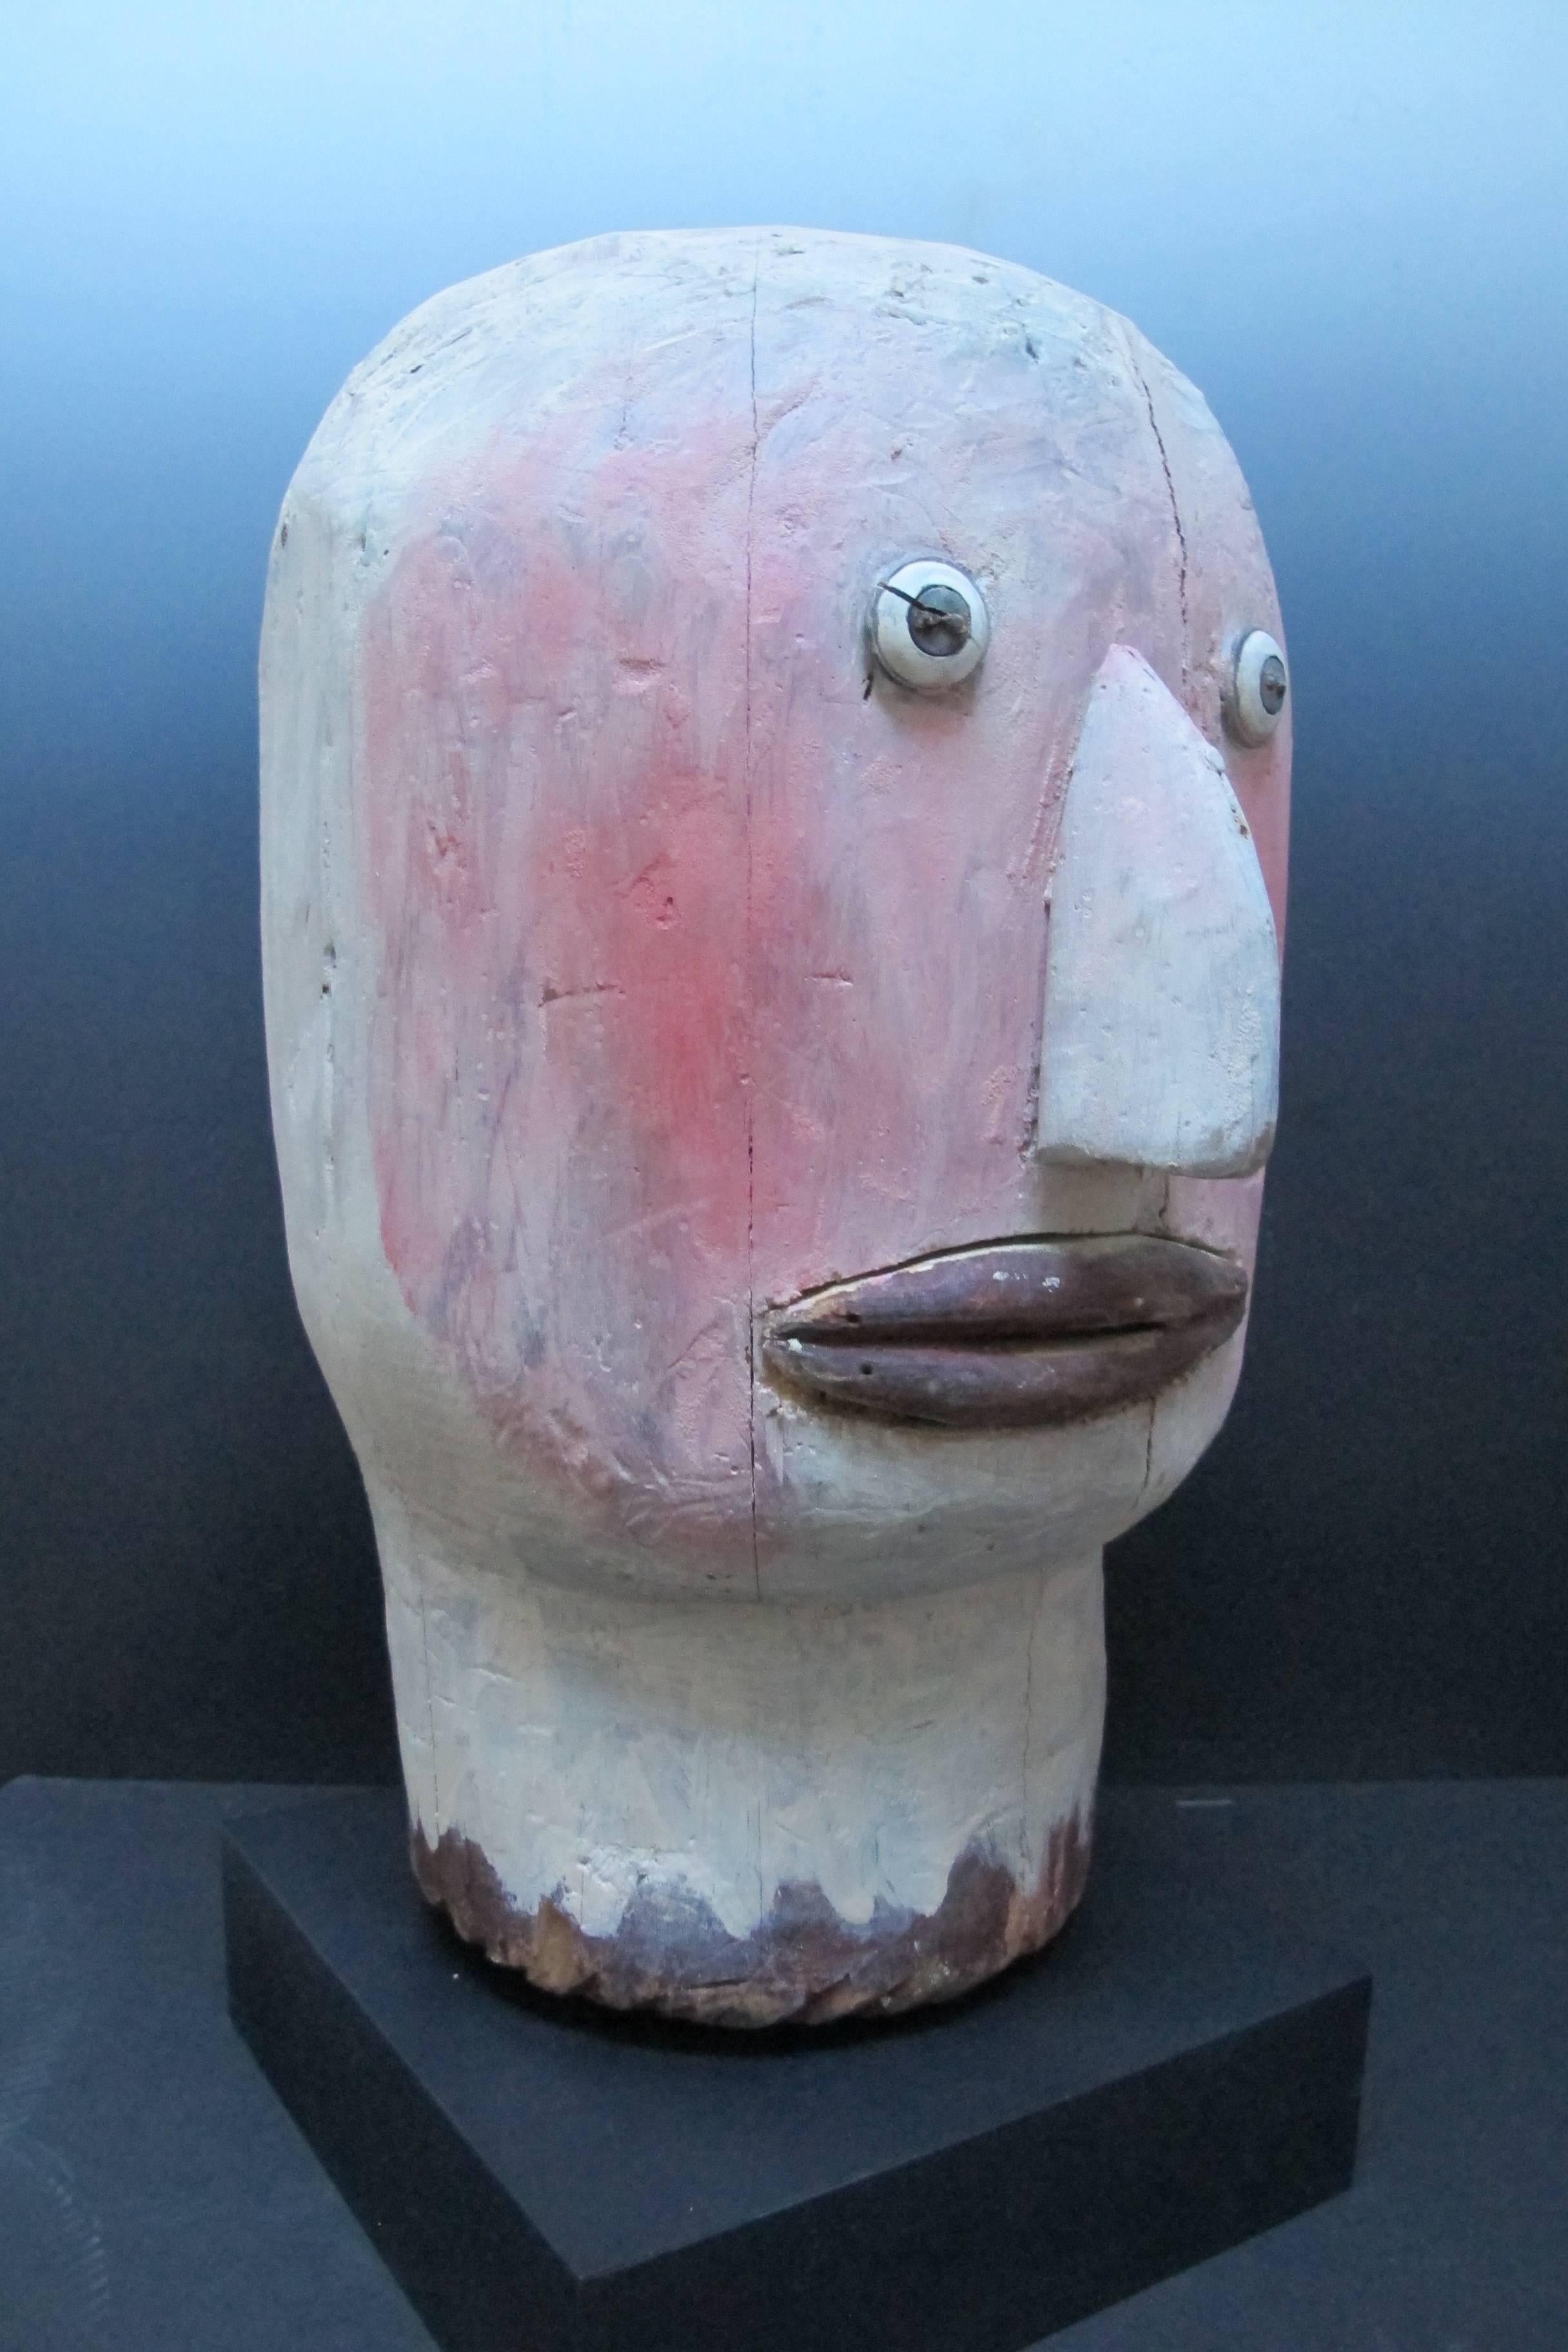 A larger than life wood head that came out of a Masonic Temple in Cape Breton.
I have not seen such a primal head from a lodge before. It has an applied nose, mouth and button eyes. It is unusually painted with white and flesh tones. It has the